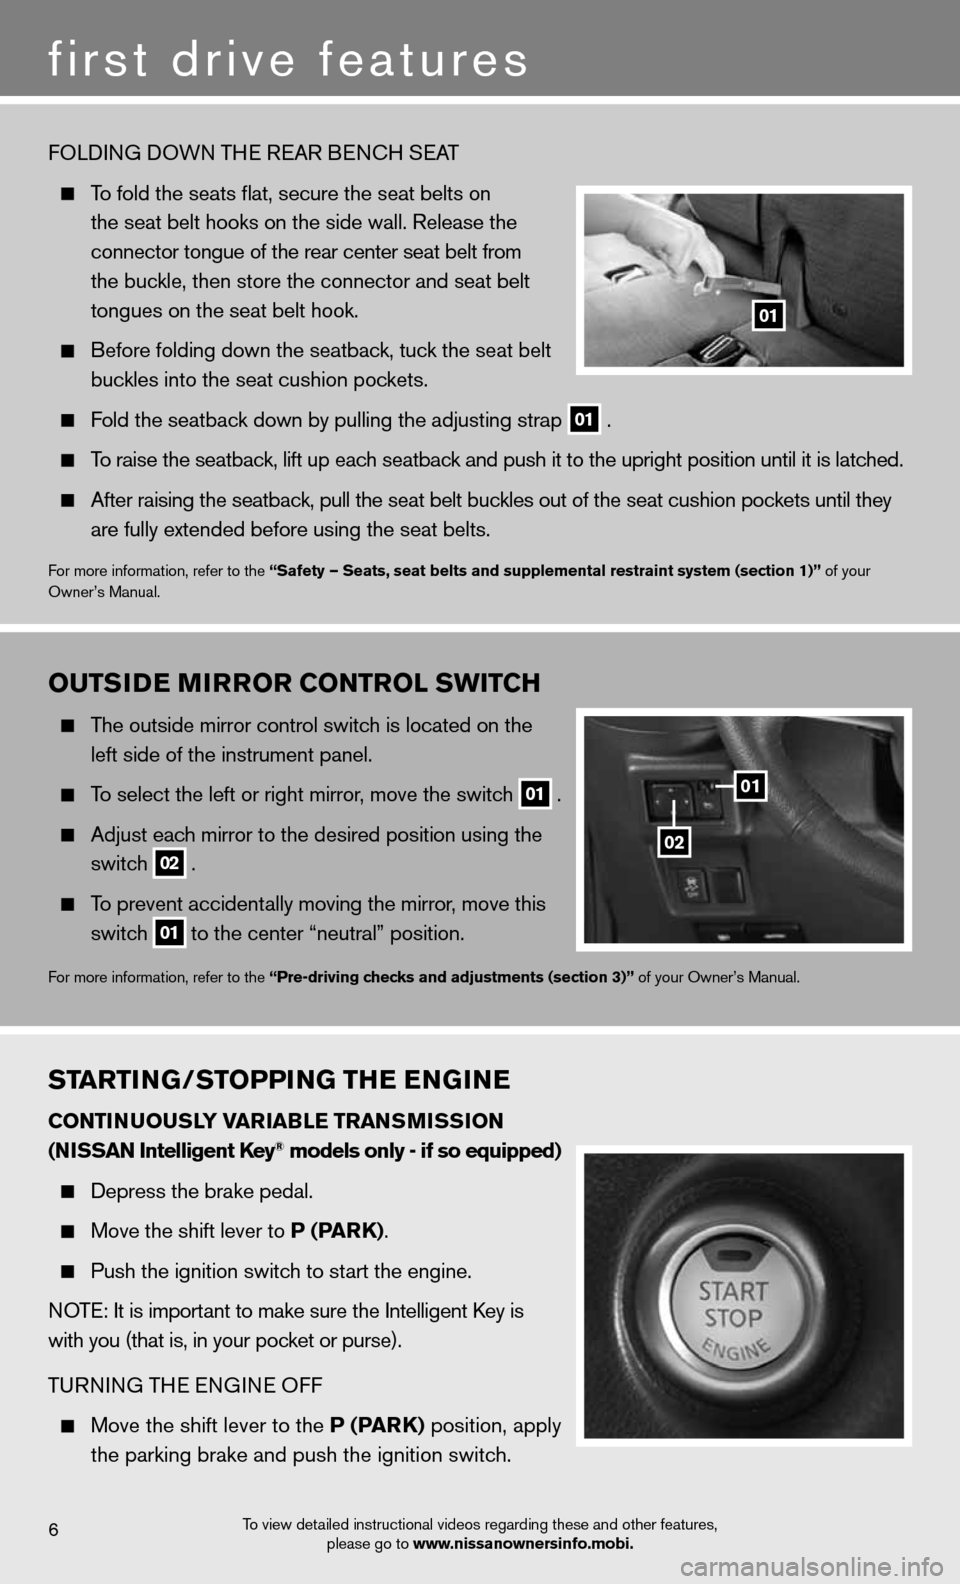 NISSAN CUBE 2012 3.G Quick Reference Guide OuTSIDe MIrrOr CONTr OL SwITCH
  The outside mirror control switch is located on the 
    left side of the instrument panel.  
 
  To select the left or right mirror, move the switch
 01 . 
 
  Adjust